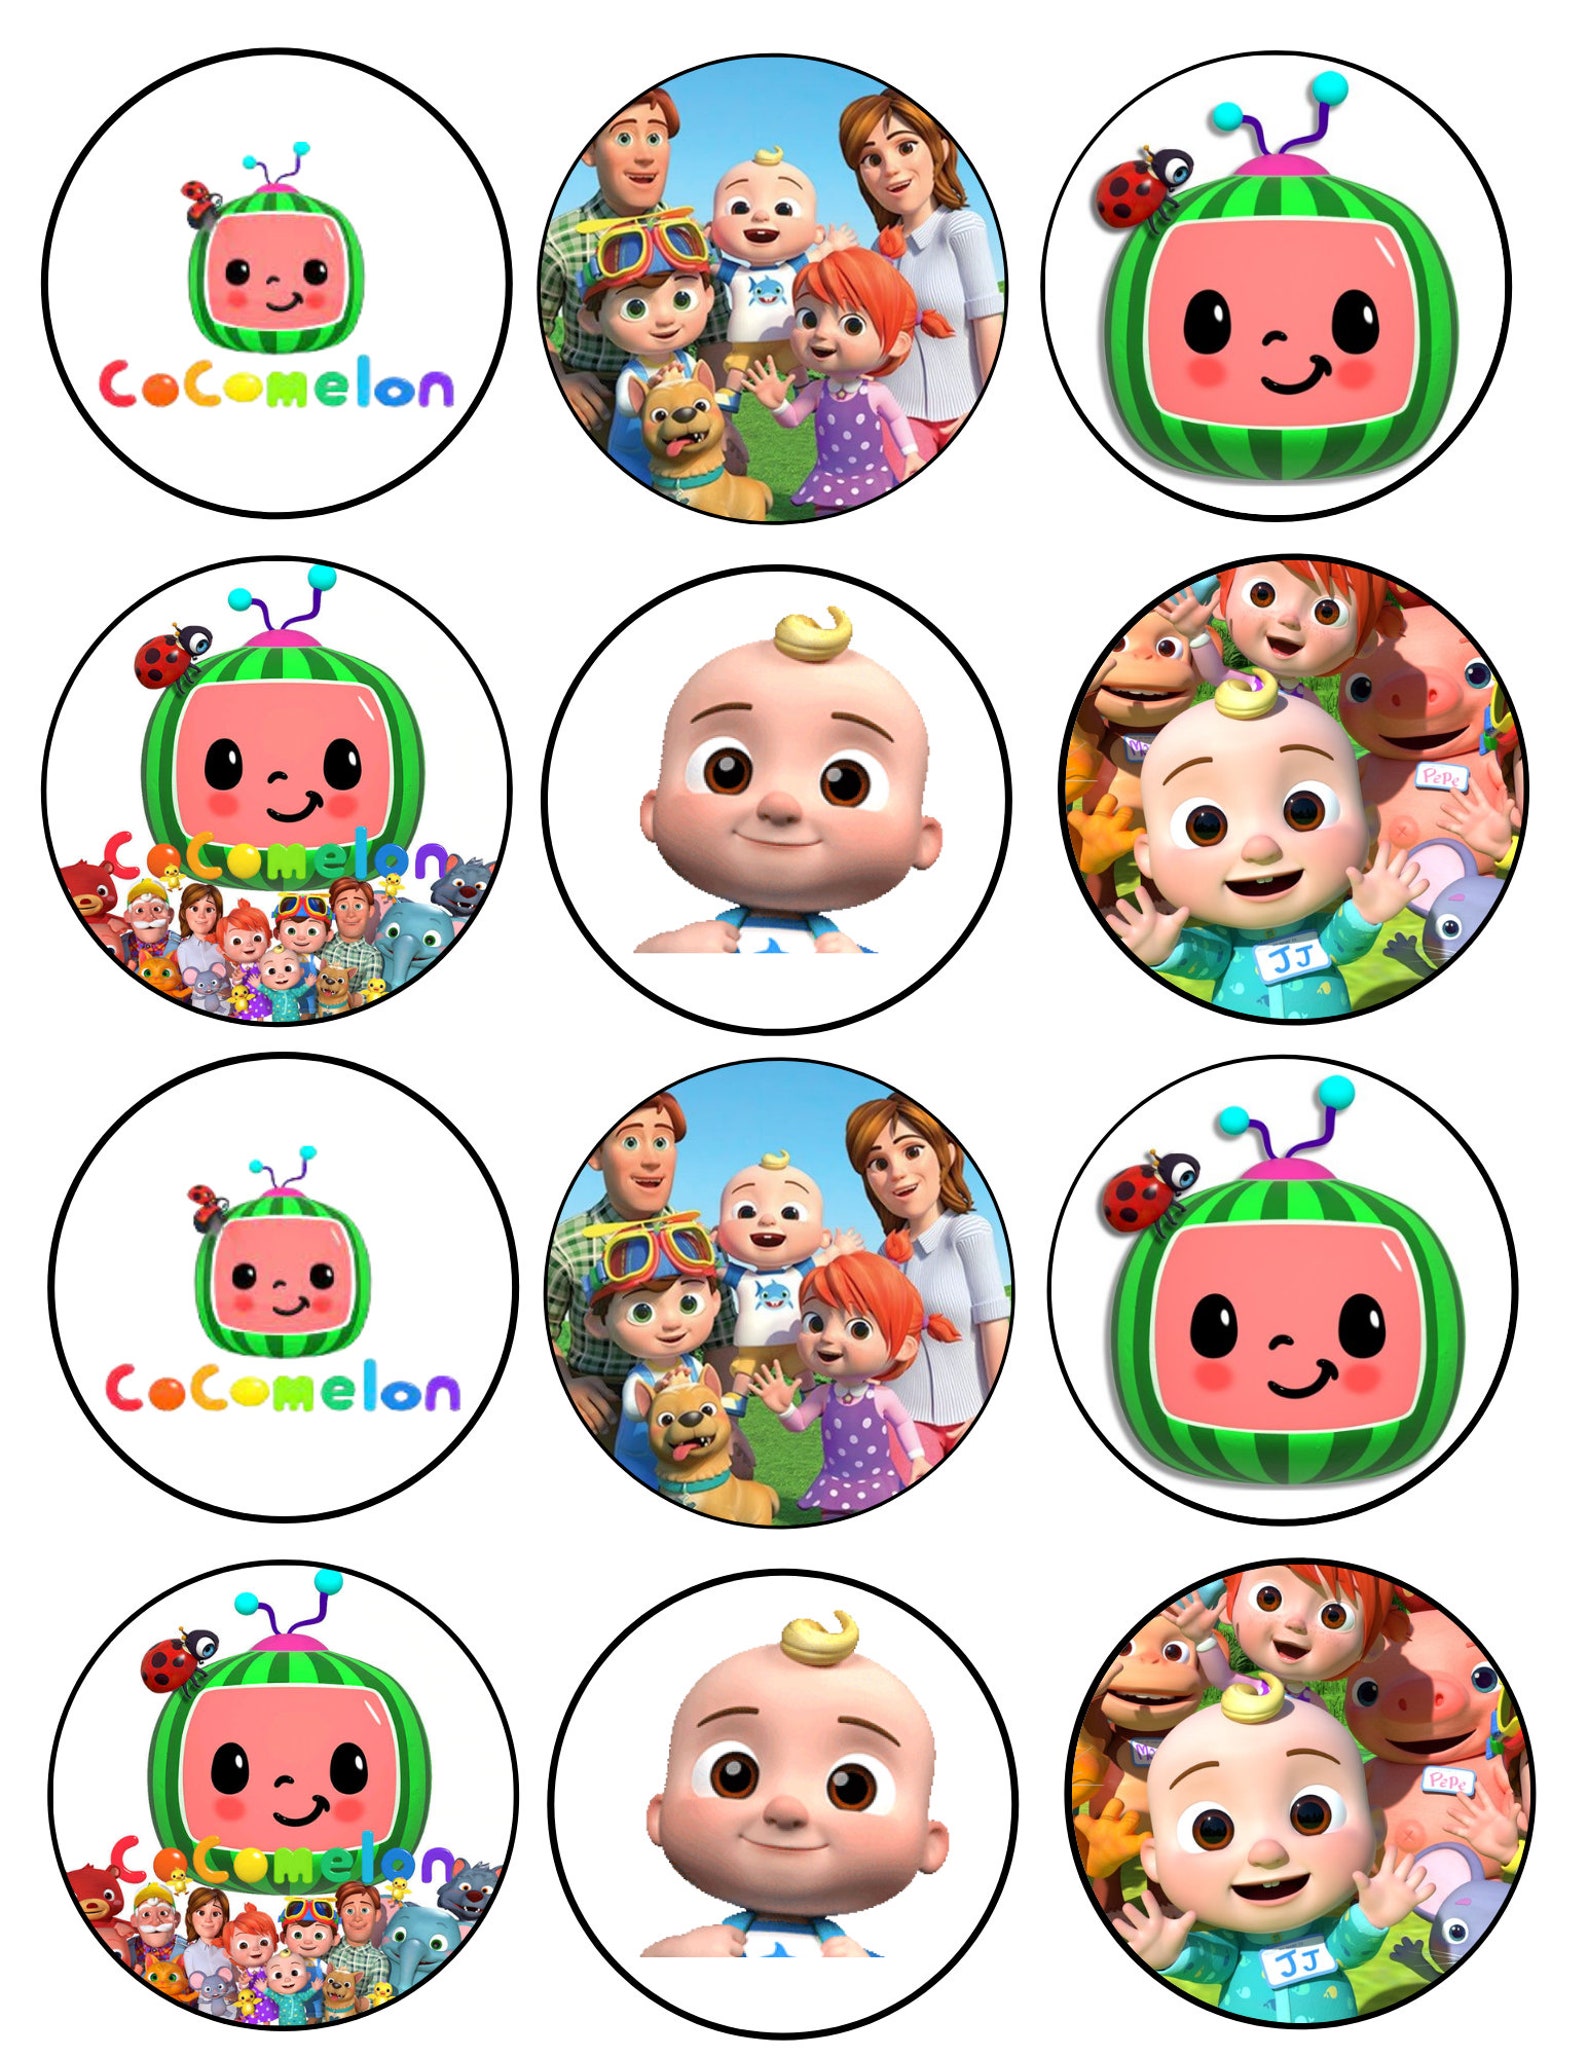 cocomelon-cupcake-toppers-etsy